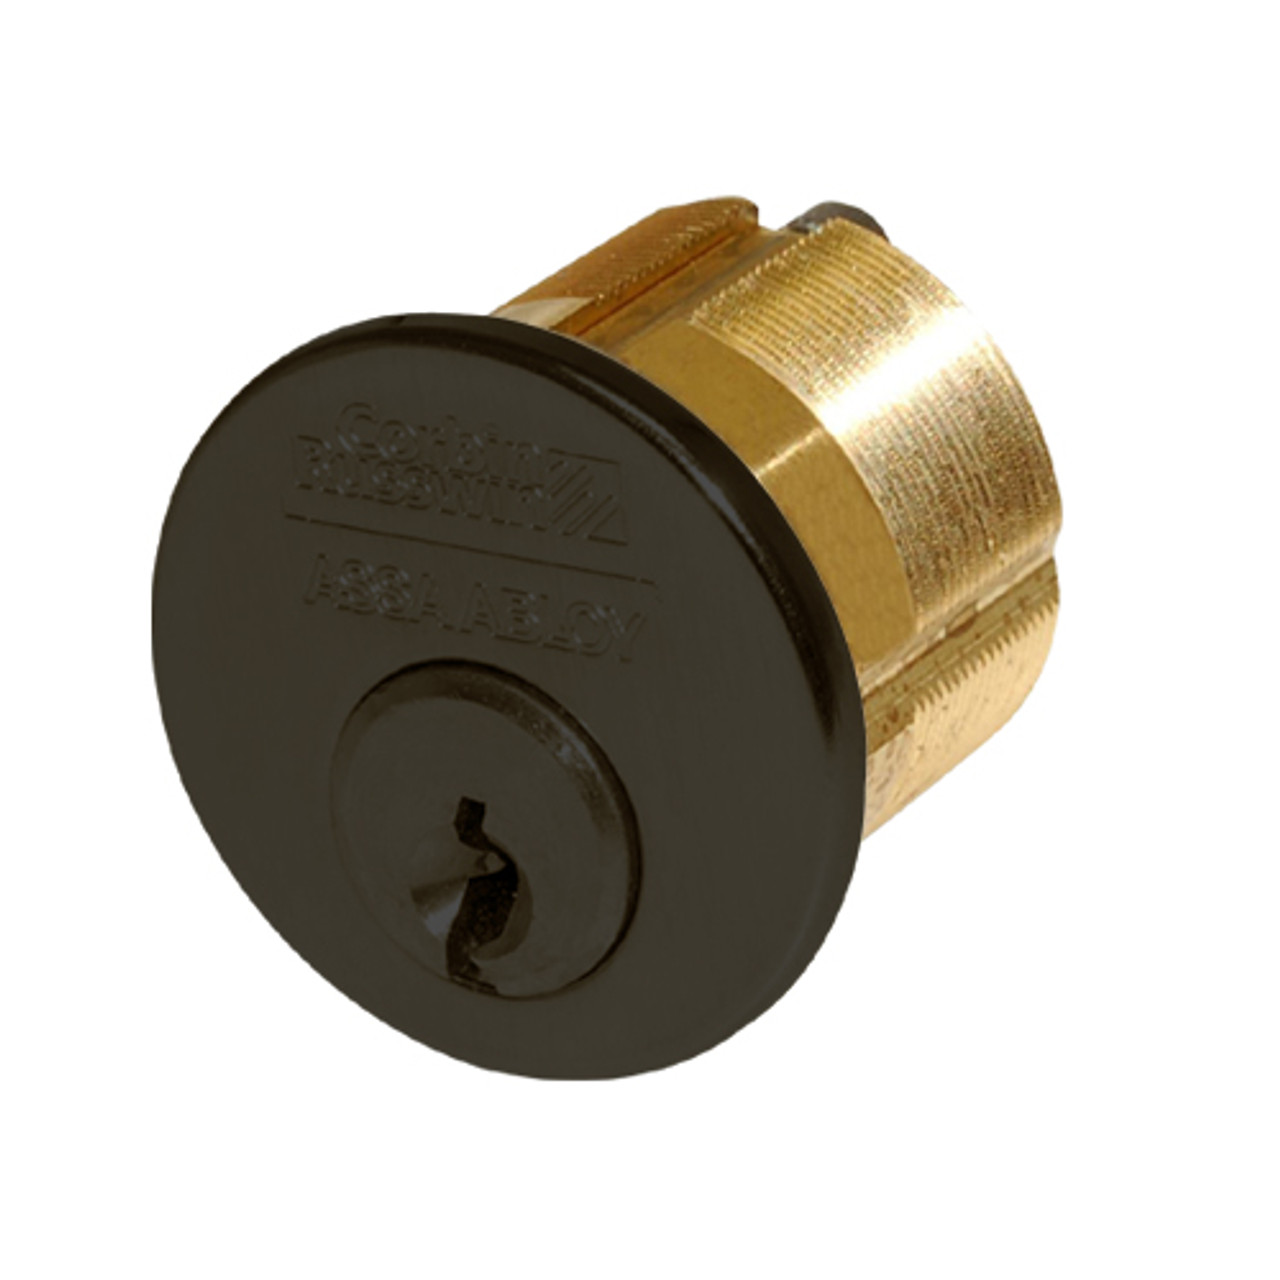 CR1000-200-A01-6-L1-613 Corbin Conventional Mortise Cylinder for Mortise Lock and DL3000 Deadlocks with Cloverleaf Cam in Oil Rubbed Bronze Finish